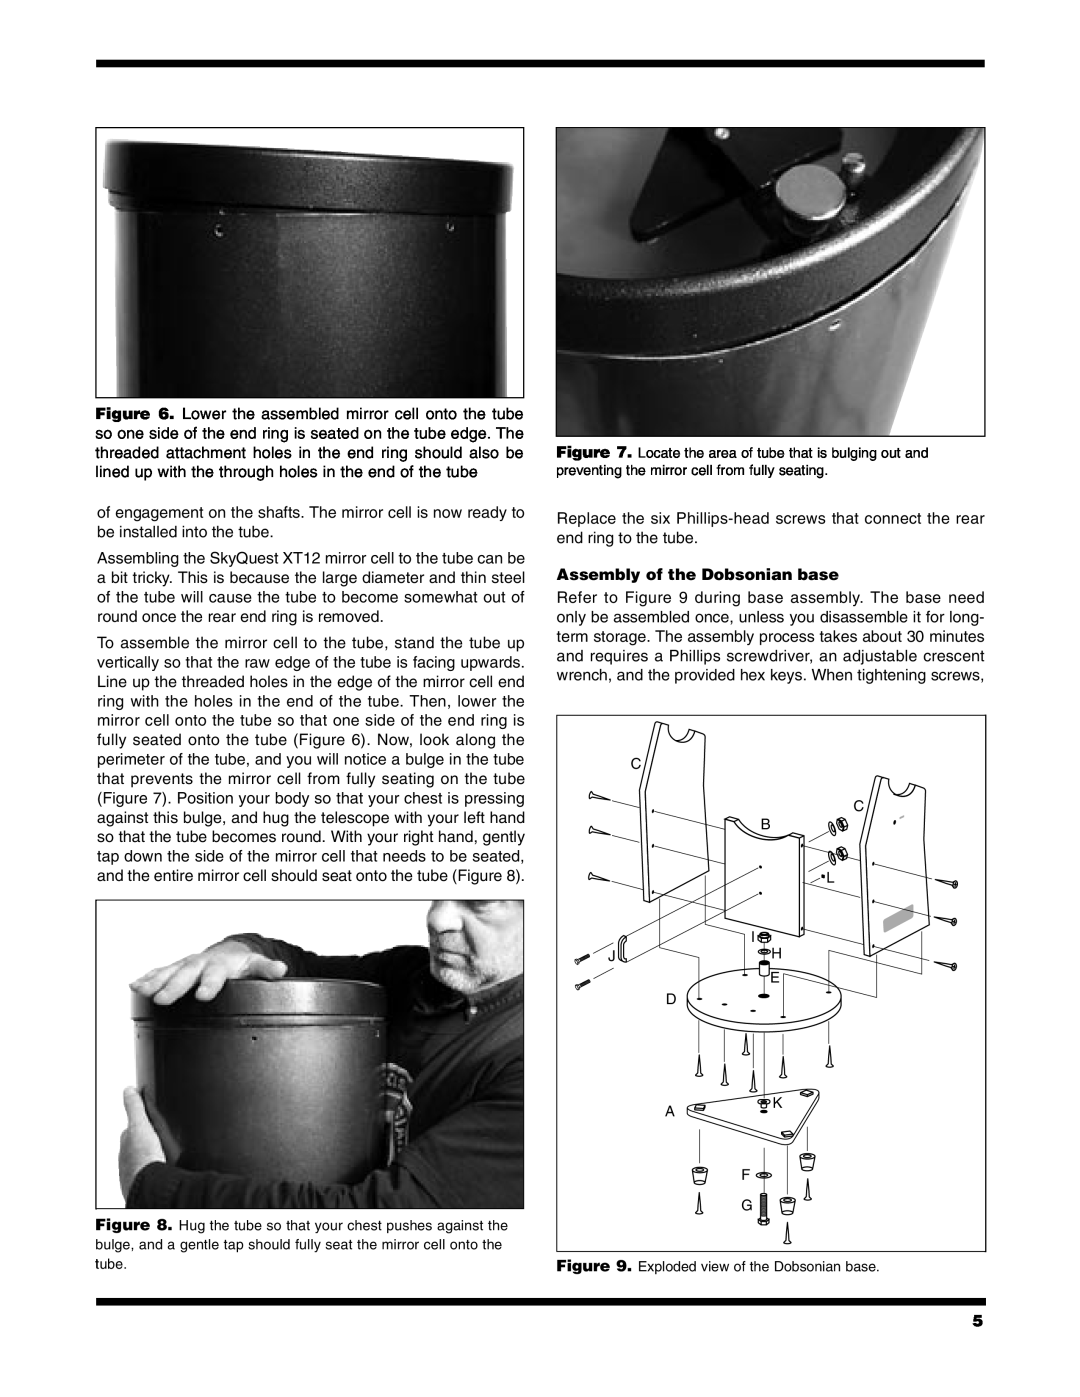 Orion 9966 instruction manual Assembly of the Dobsonian base 